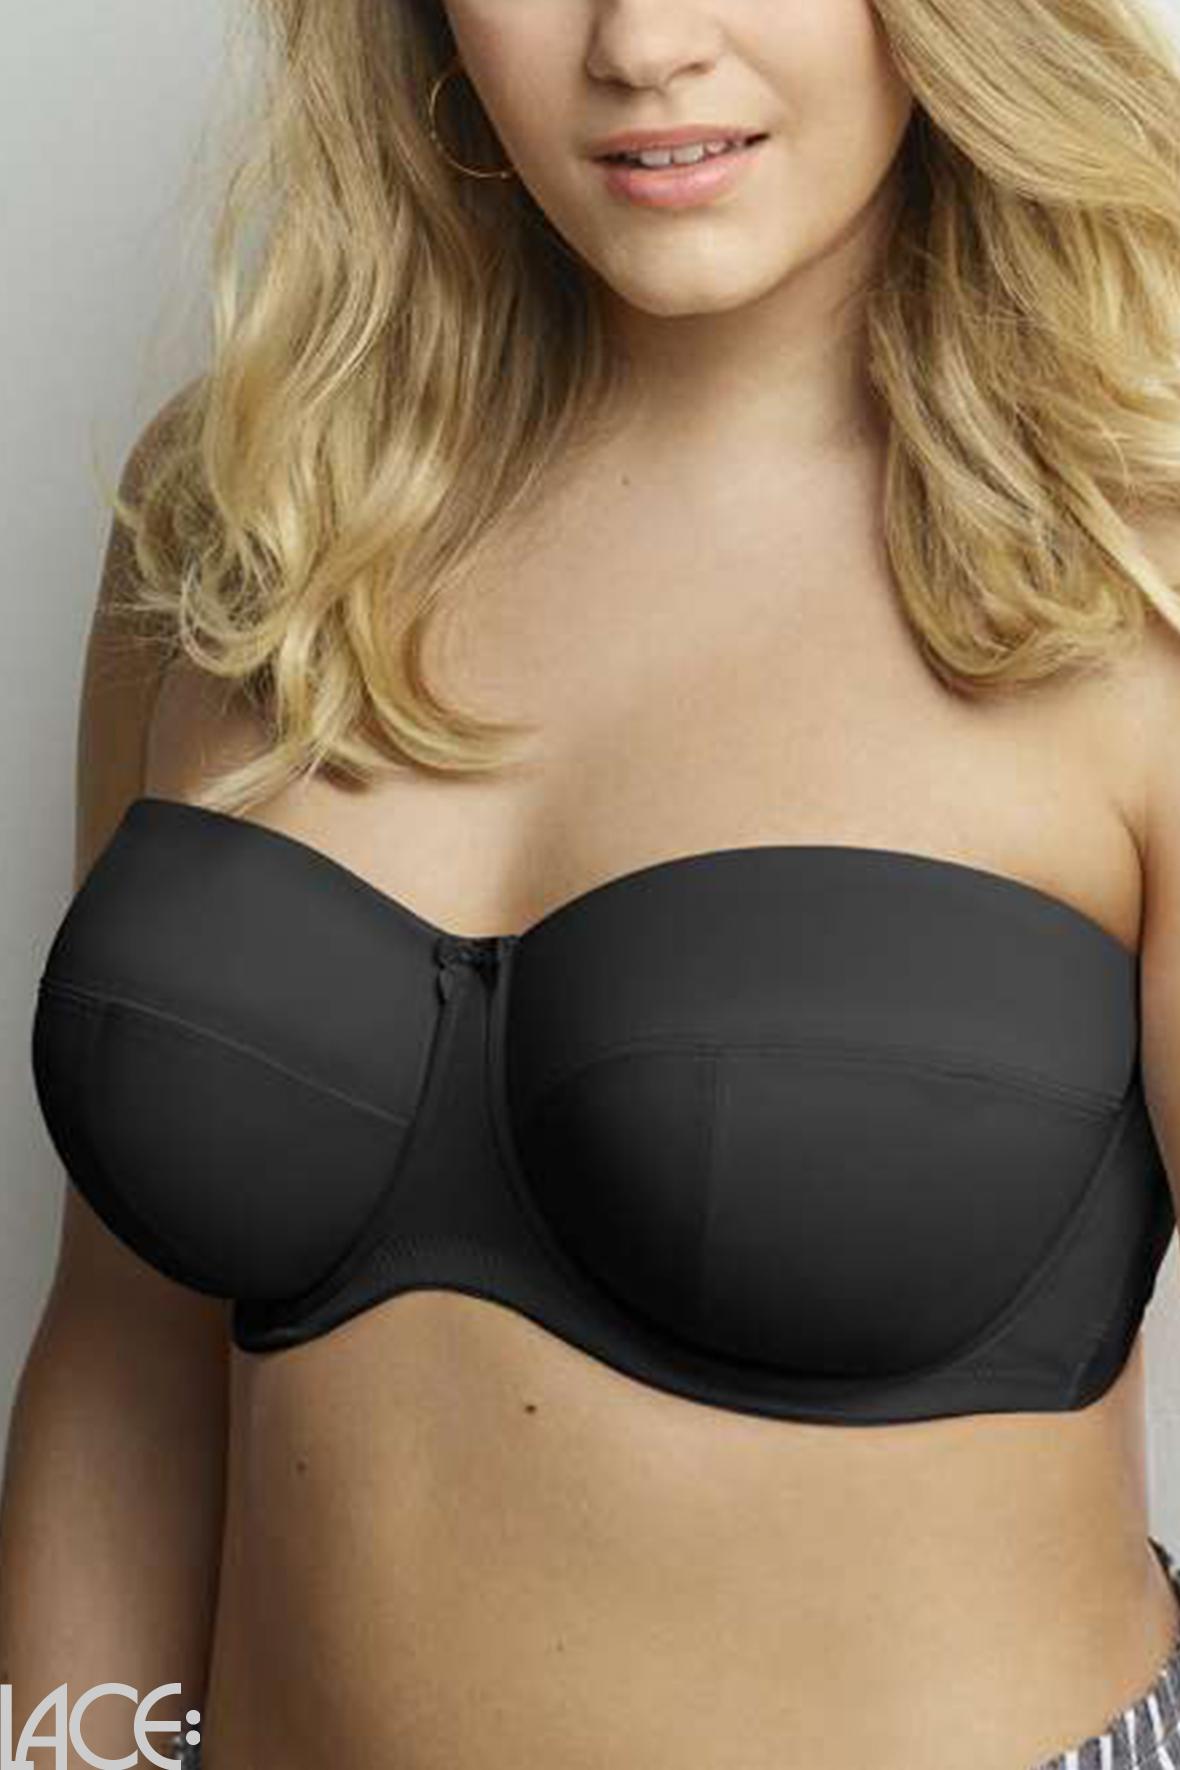 Panache Lingerie - Yet to find a supportive strapless bra? Dana by